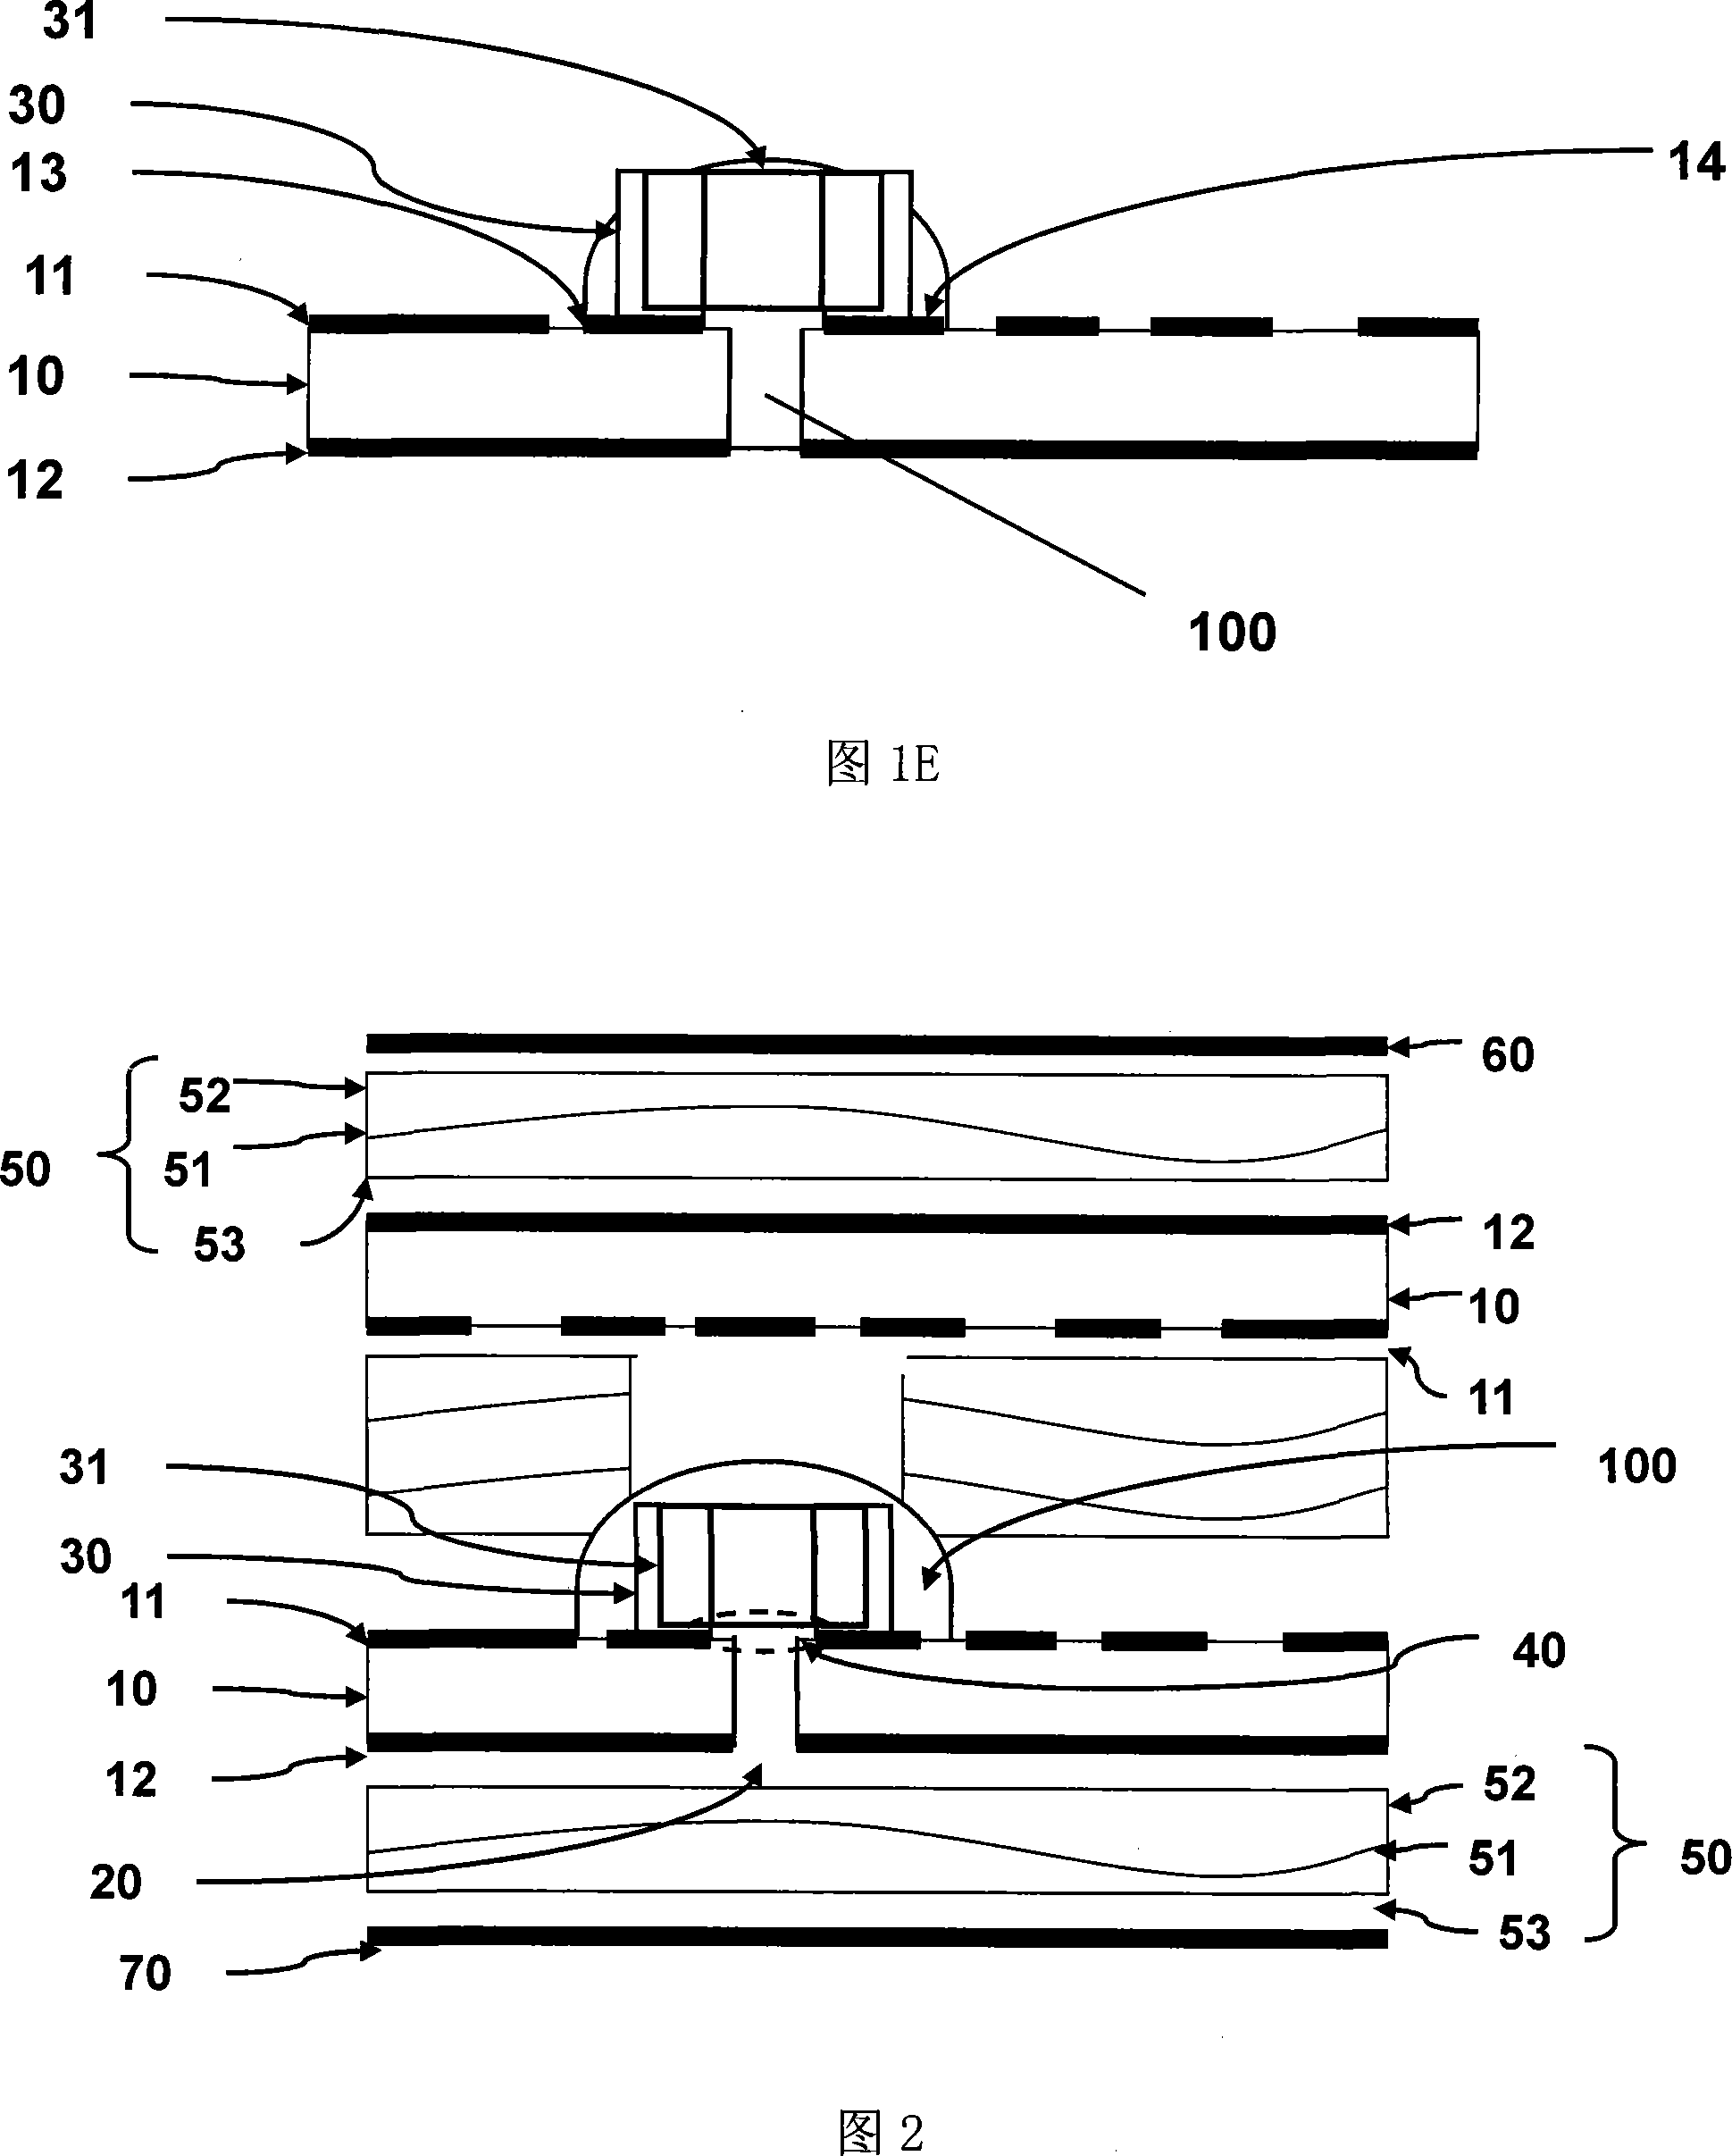 No empty hole installation method for installing electronic components